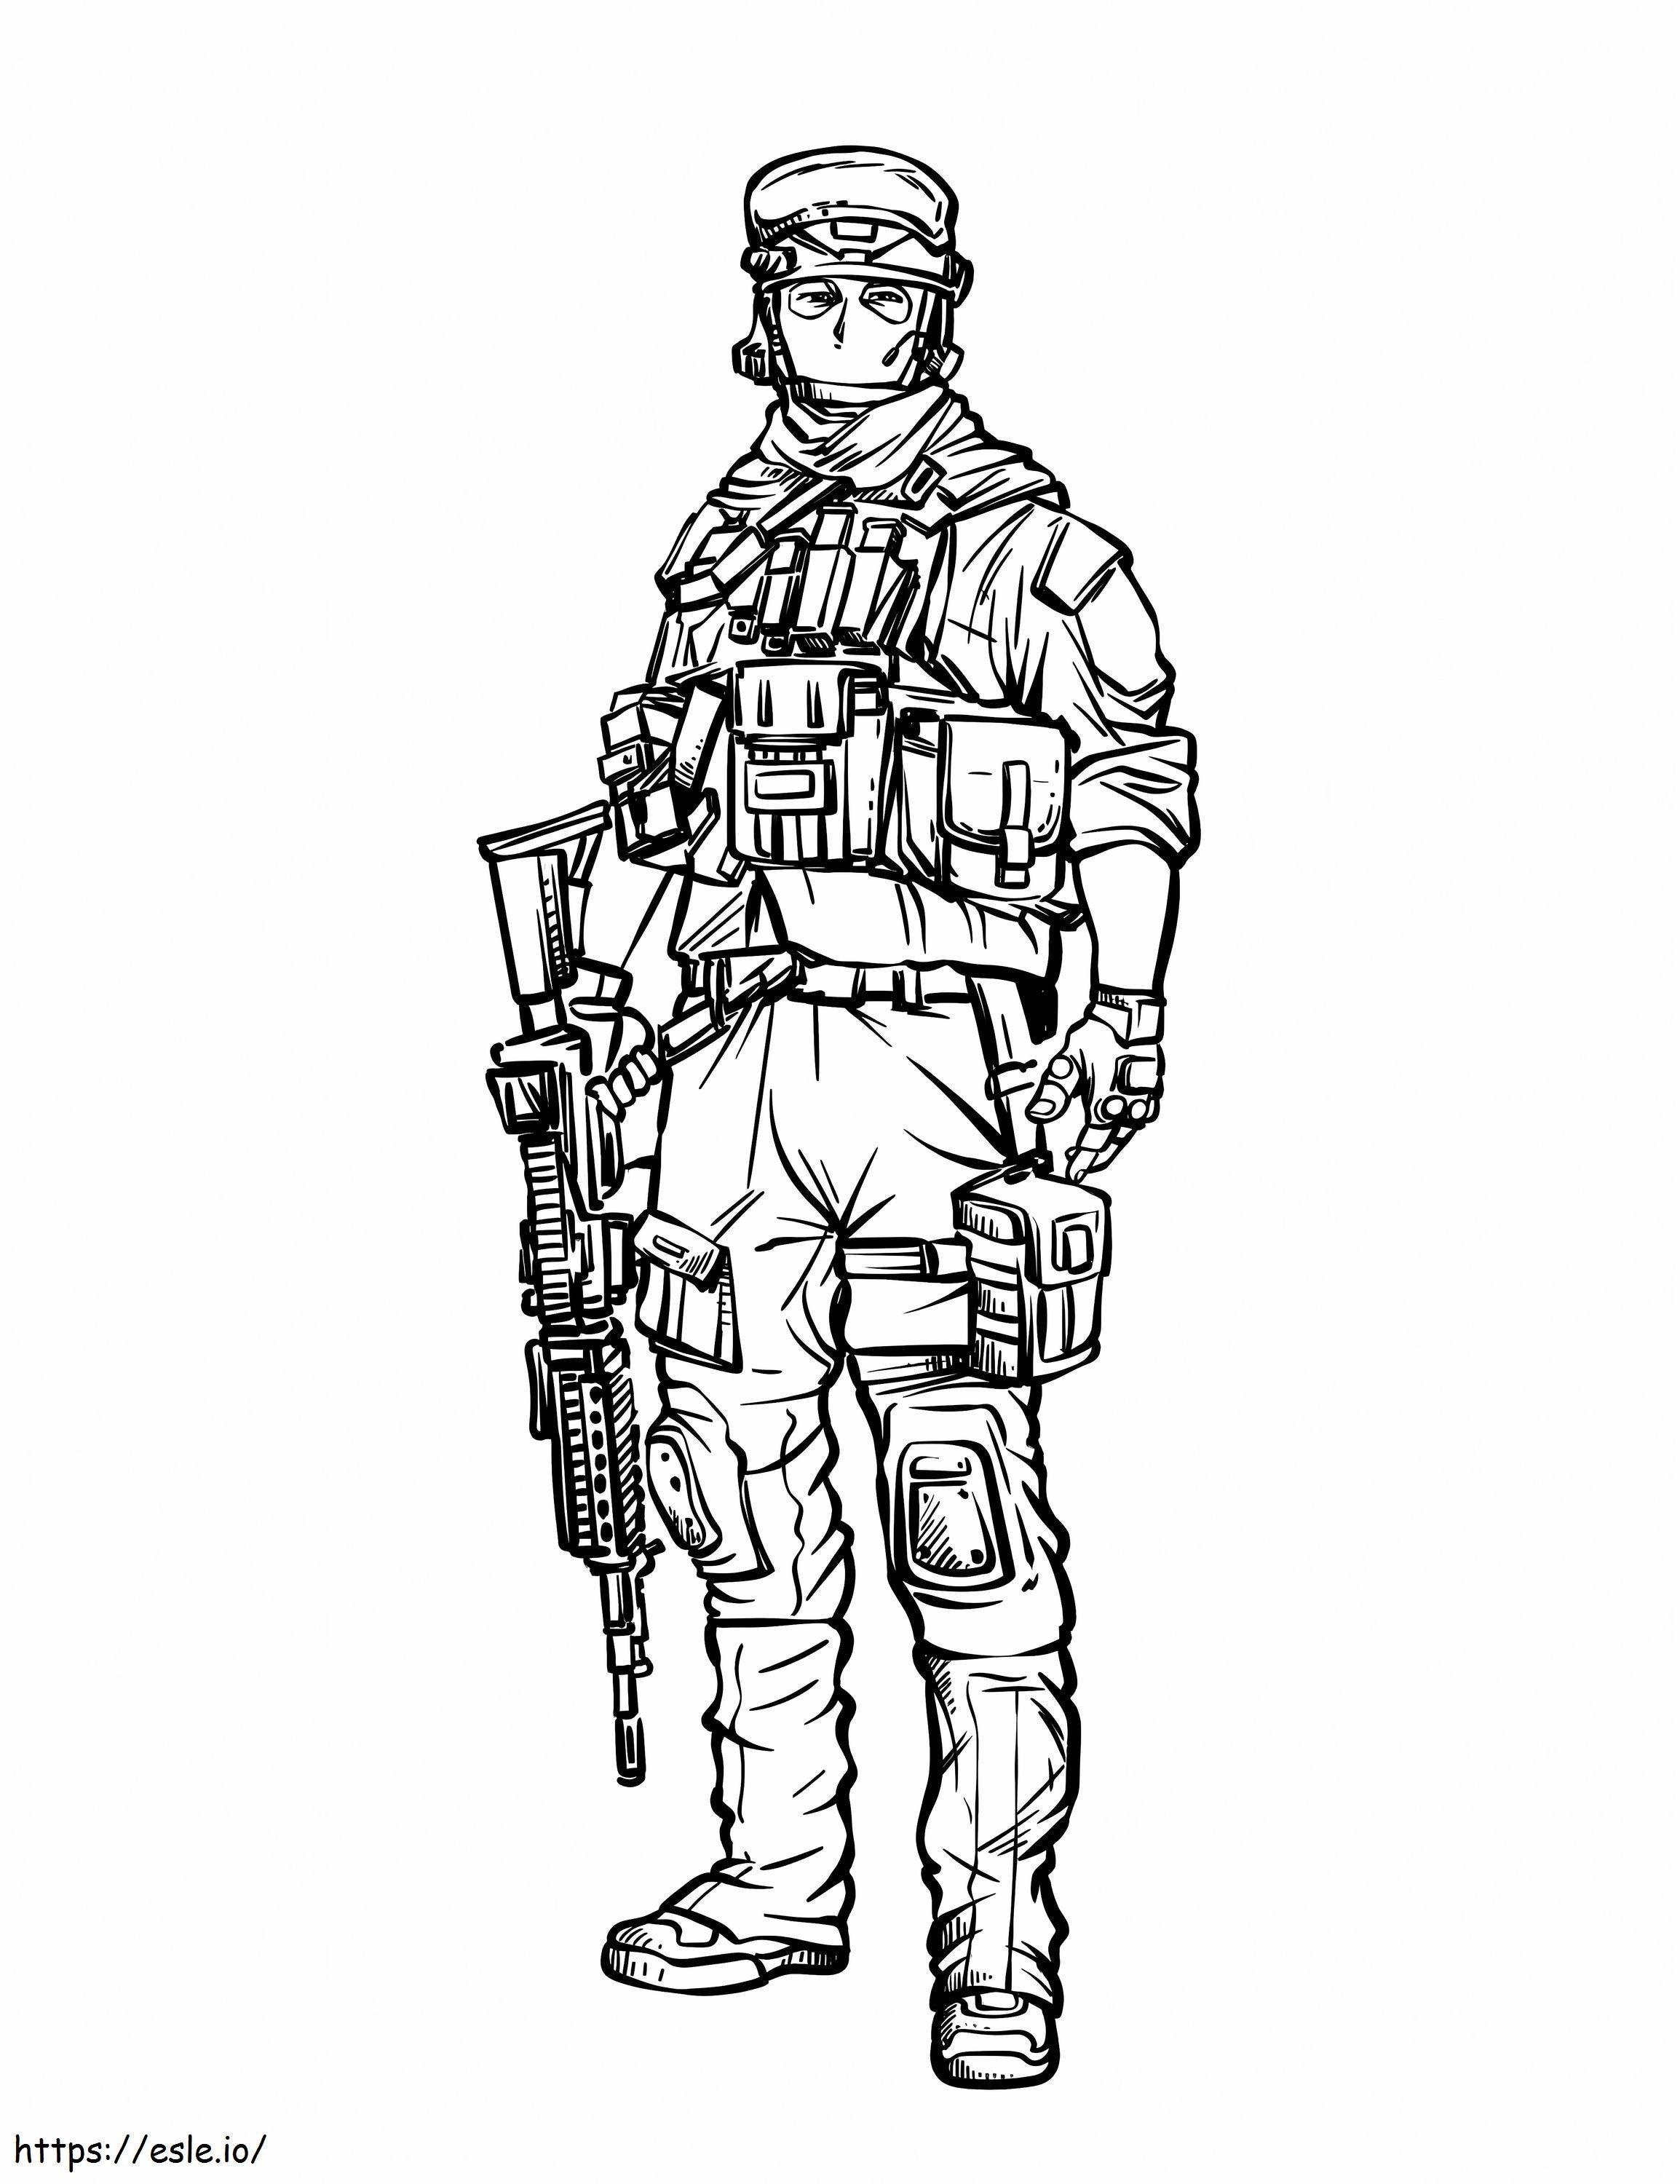 Normal Soldier coloring page